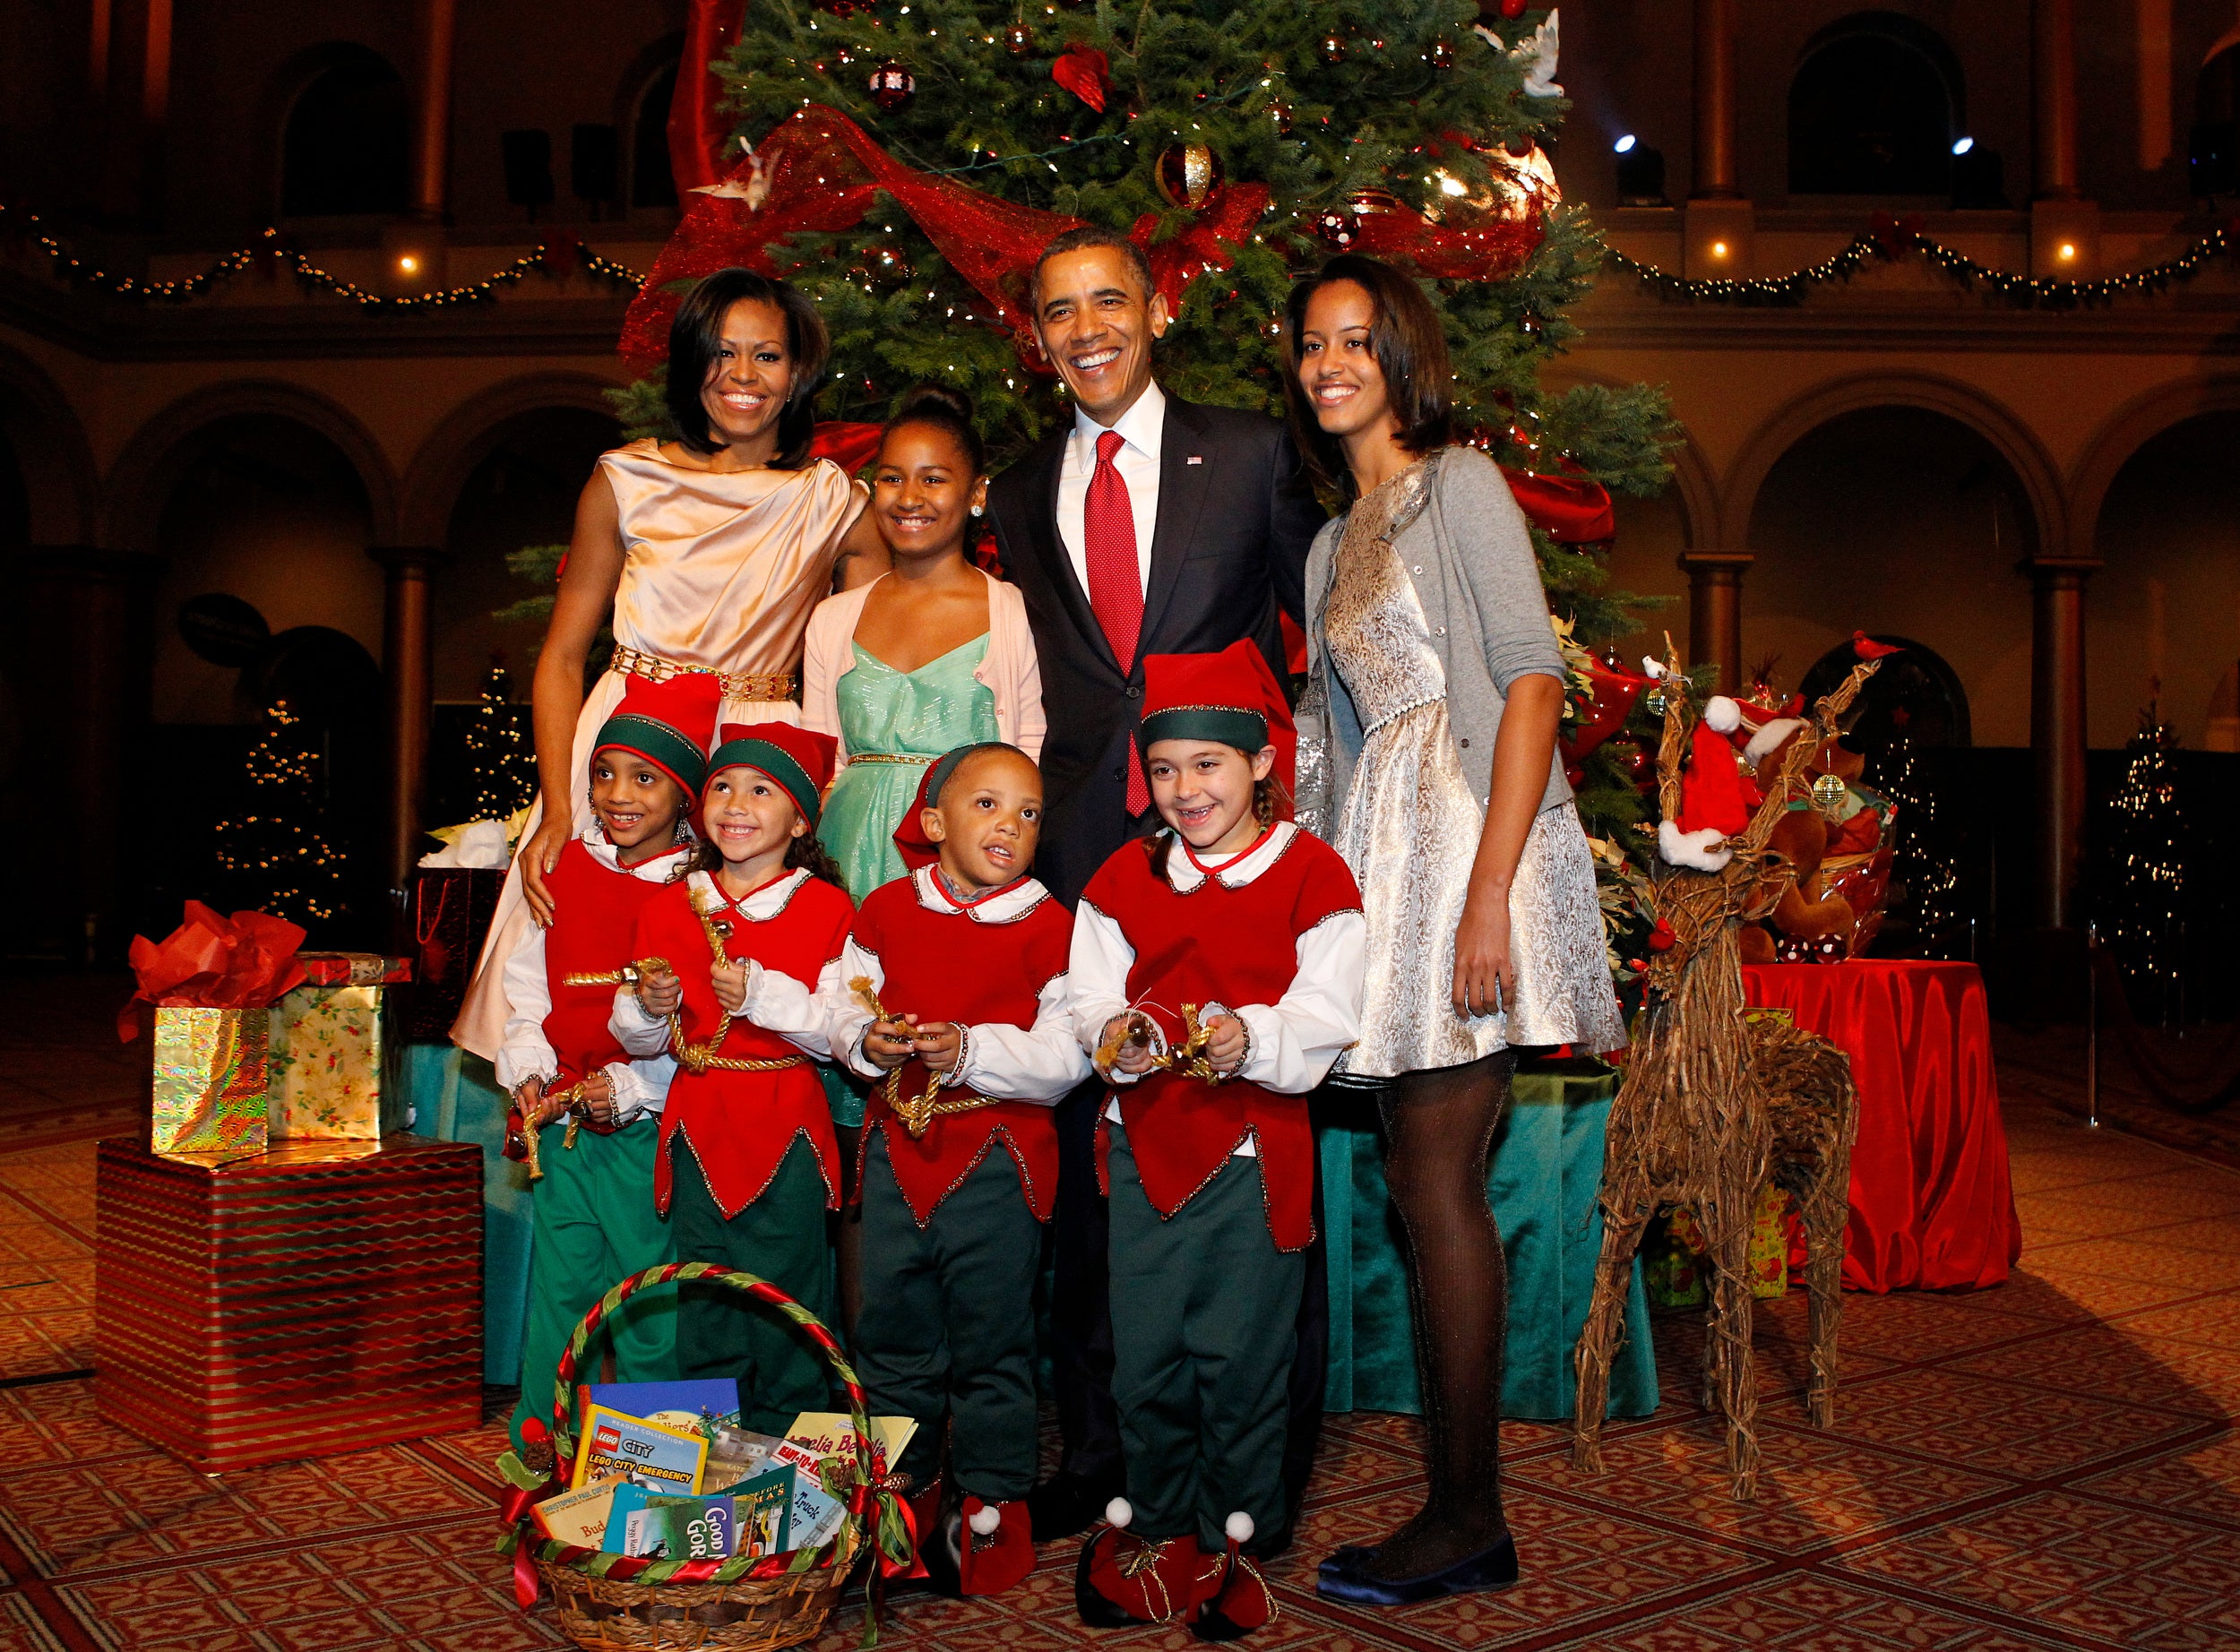 The Obamas spend Christmas in Hawaii each year&nbsp;